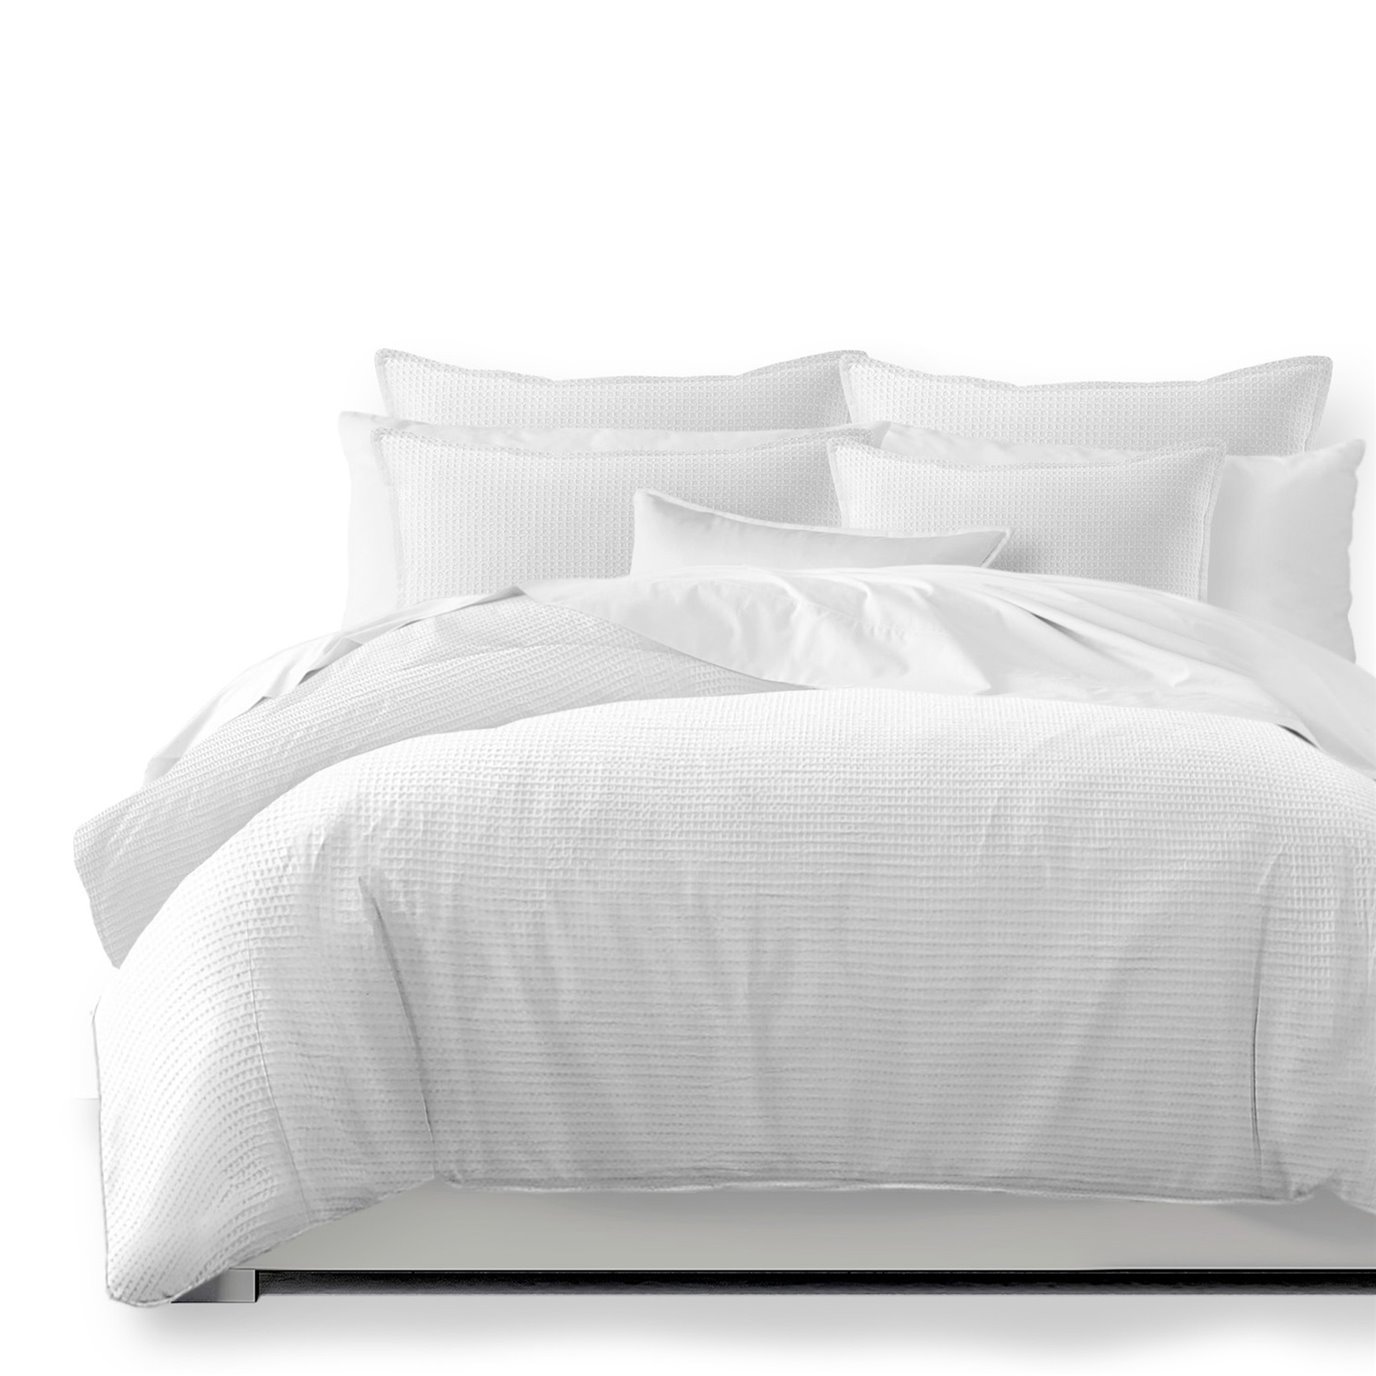 Classic Waffle White Coverlet and Pillow Sham(s) Set - Size Twin